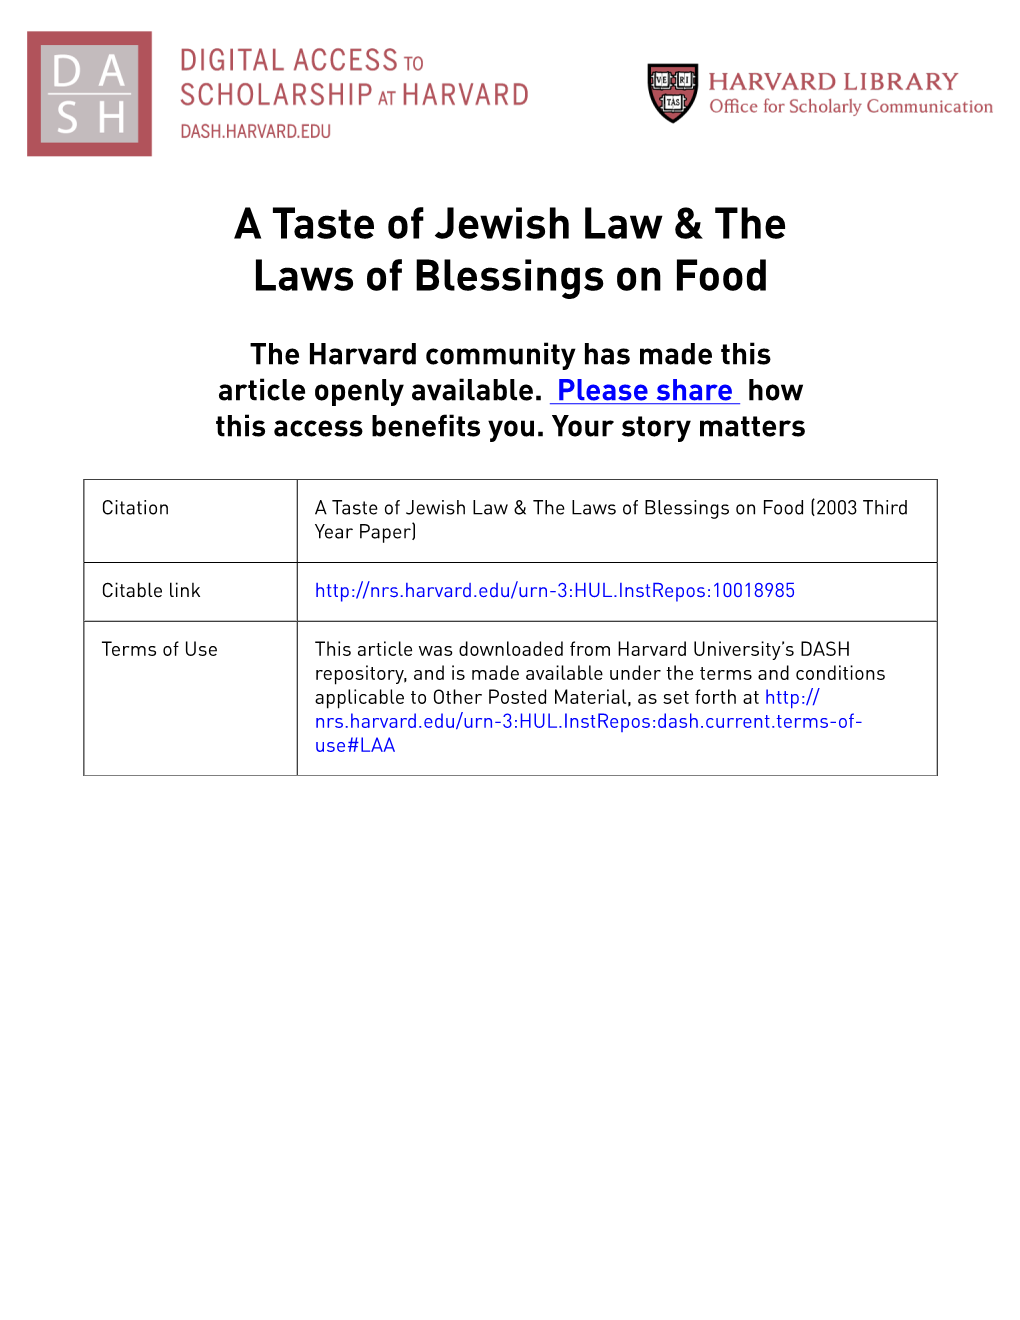 A Taste of Jewish Law & the Laws of Blessings on Food